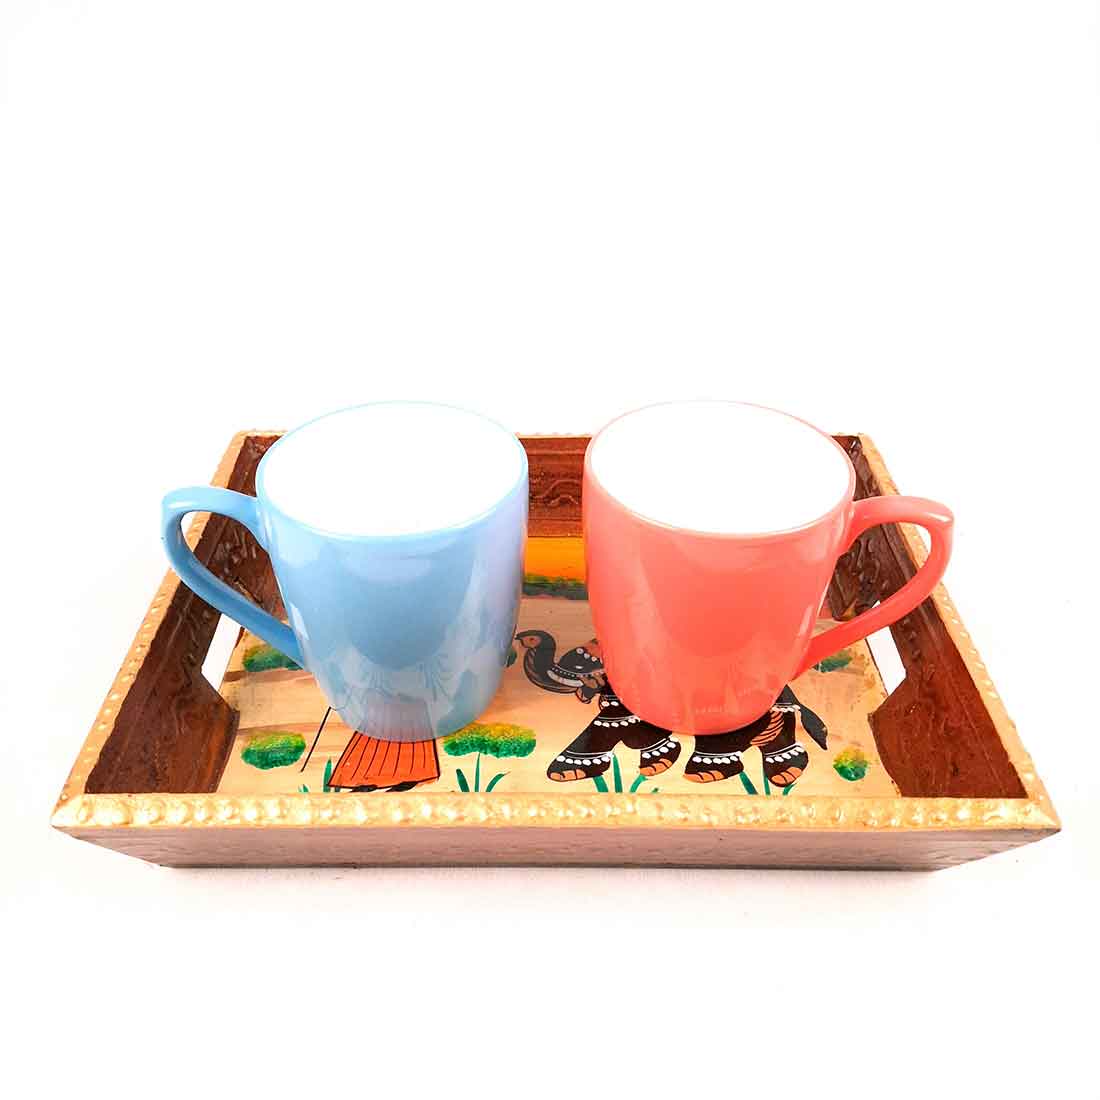 Decorative Tray | Wooden Serving Tray - For Tea & Snack Serving and Organising - 9 Inch - Apkamart#Style_Pack of 2